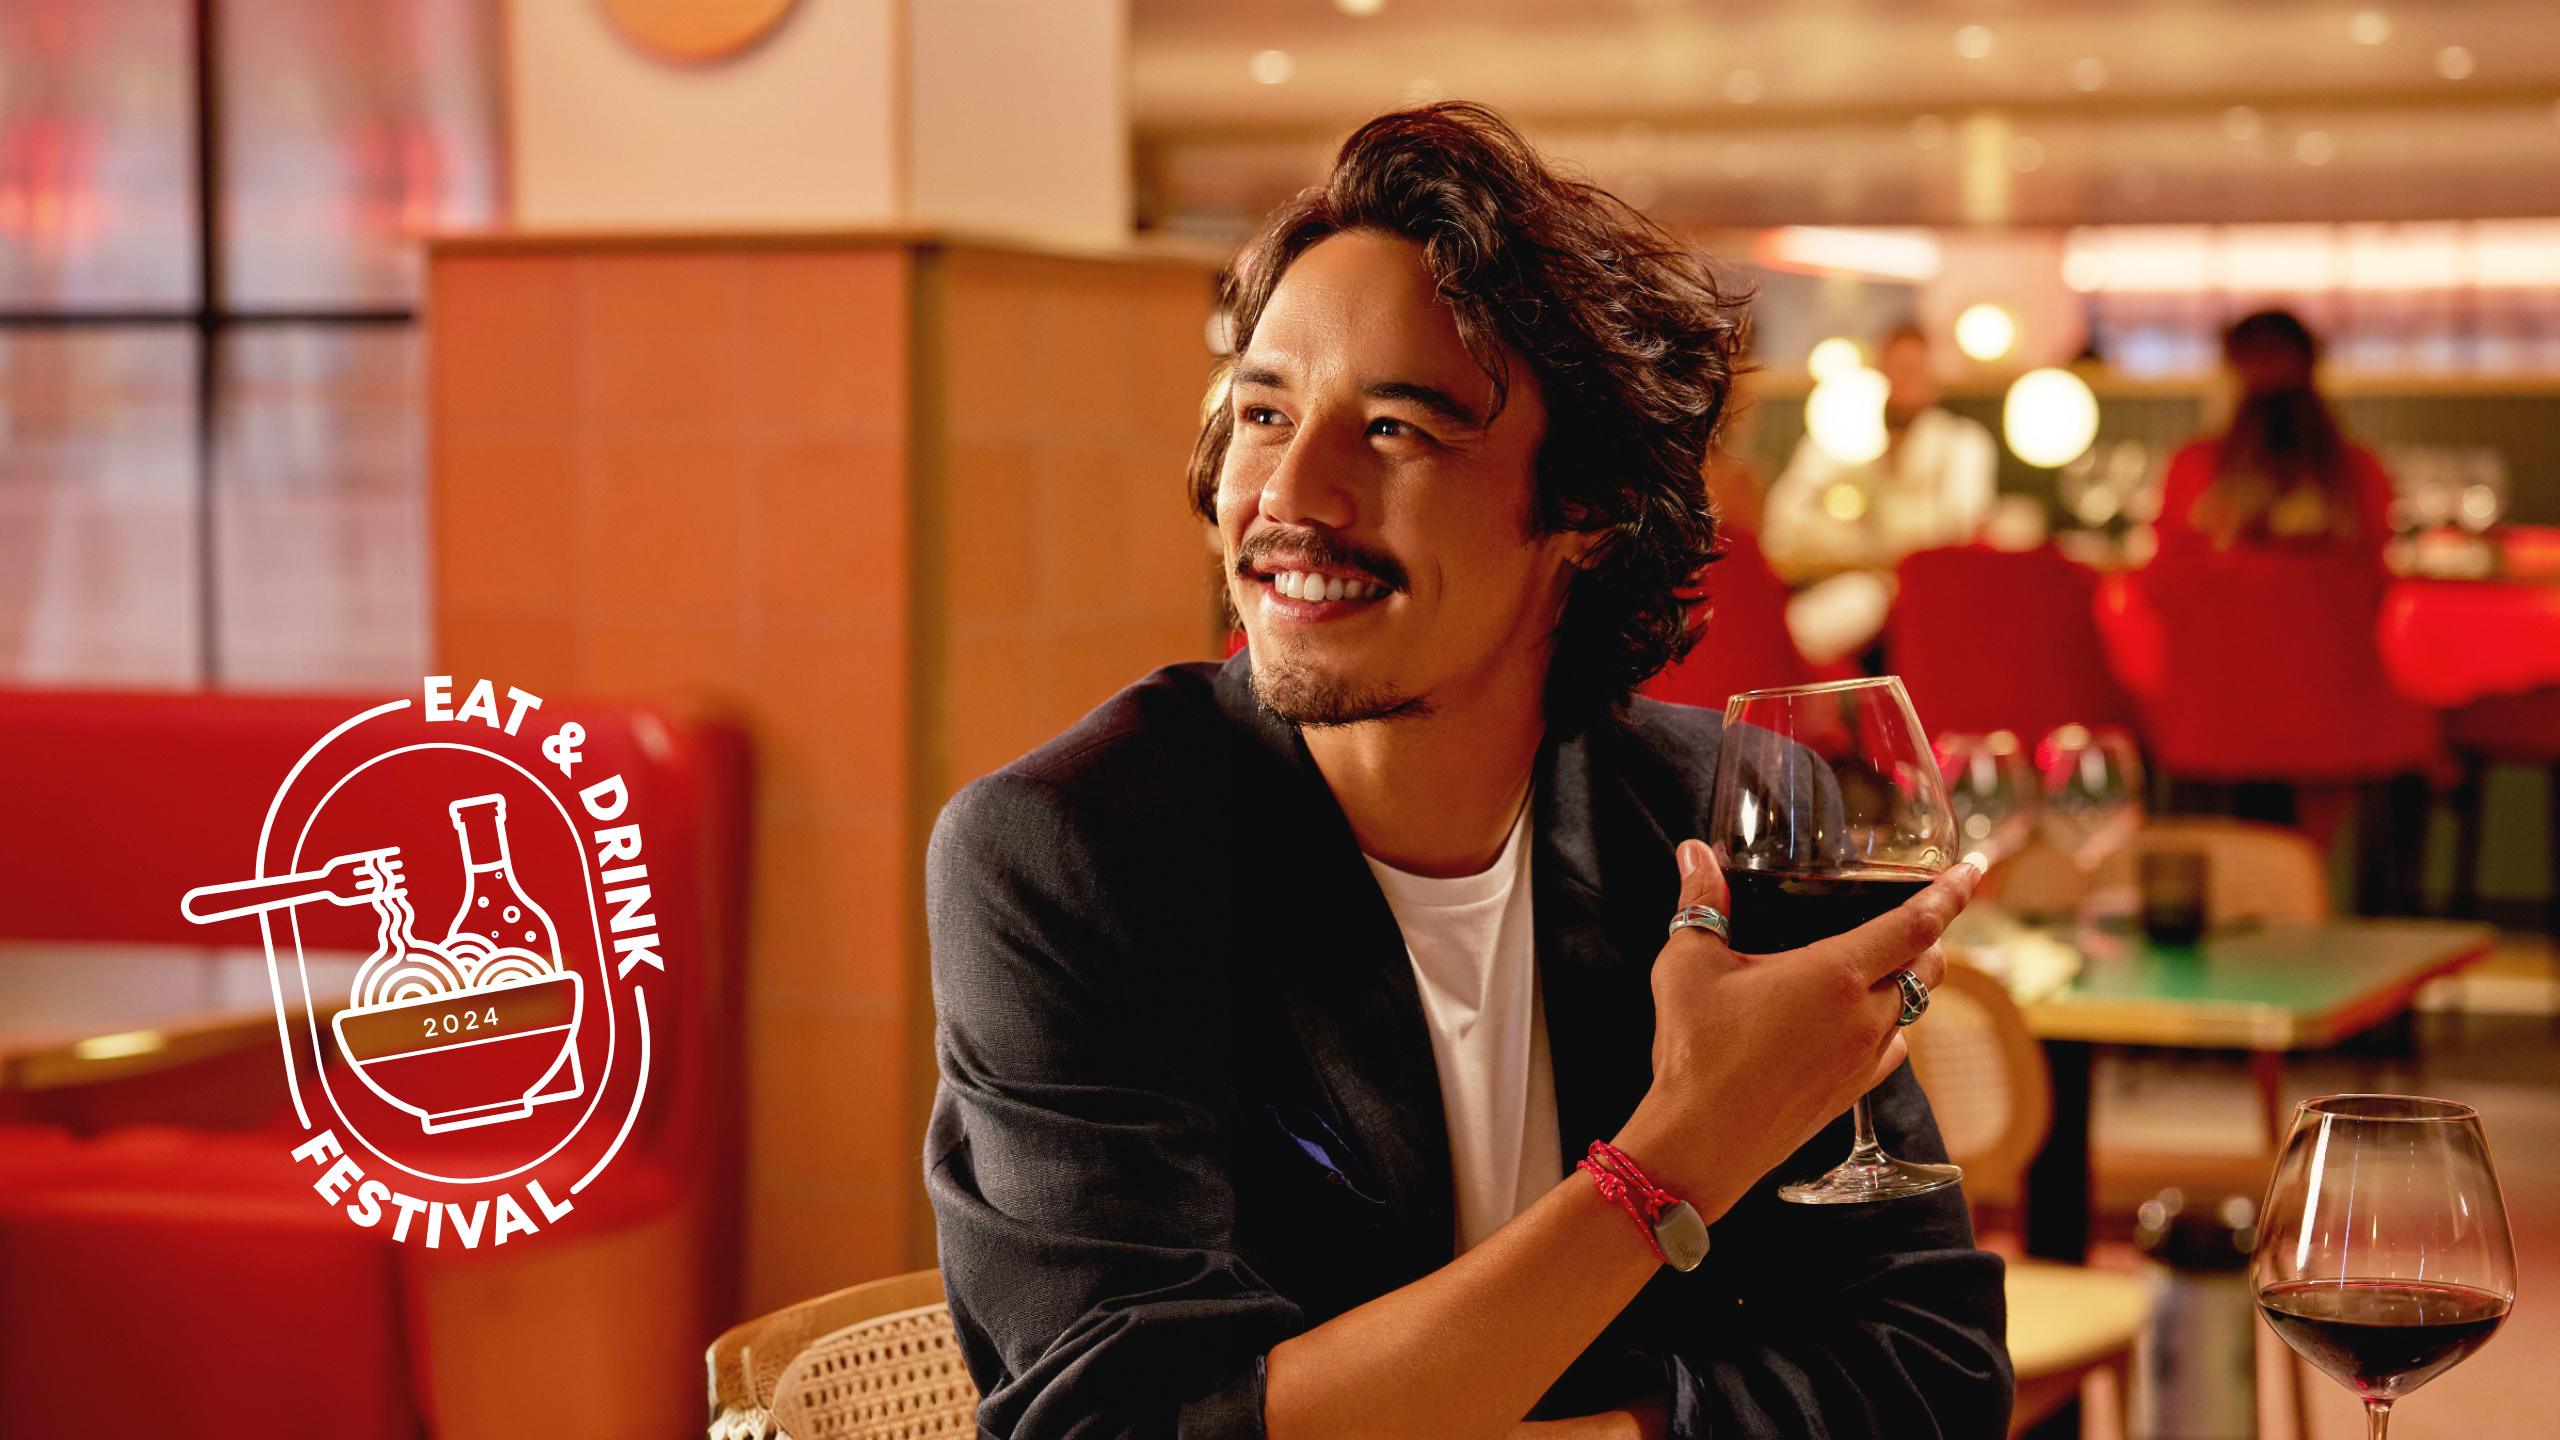 Eat and Drink at Virgin Voyages